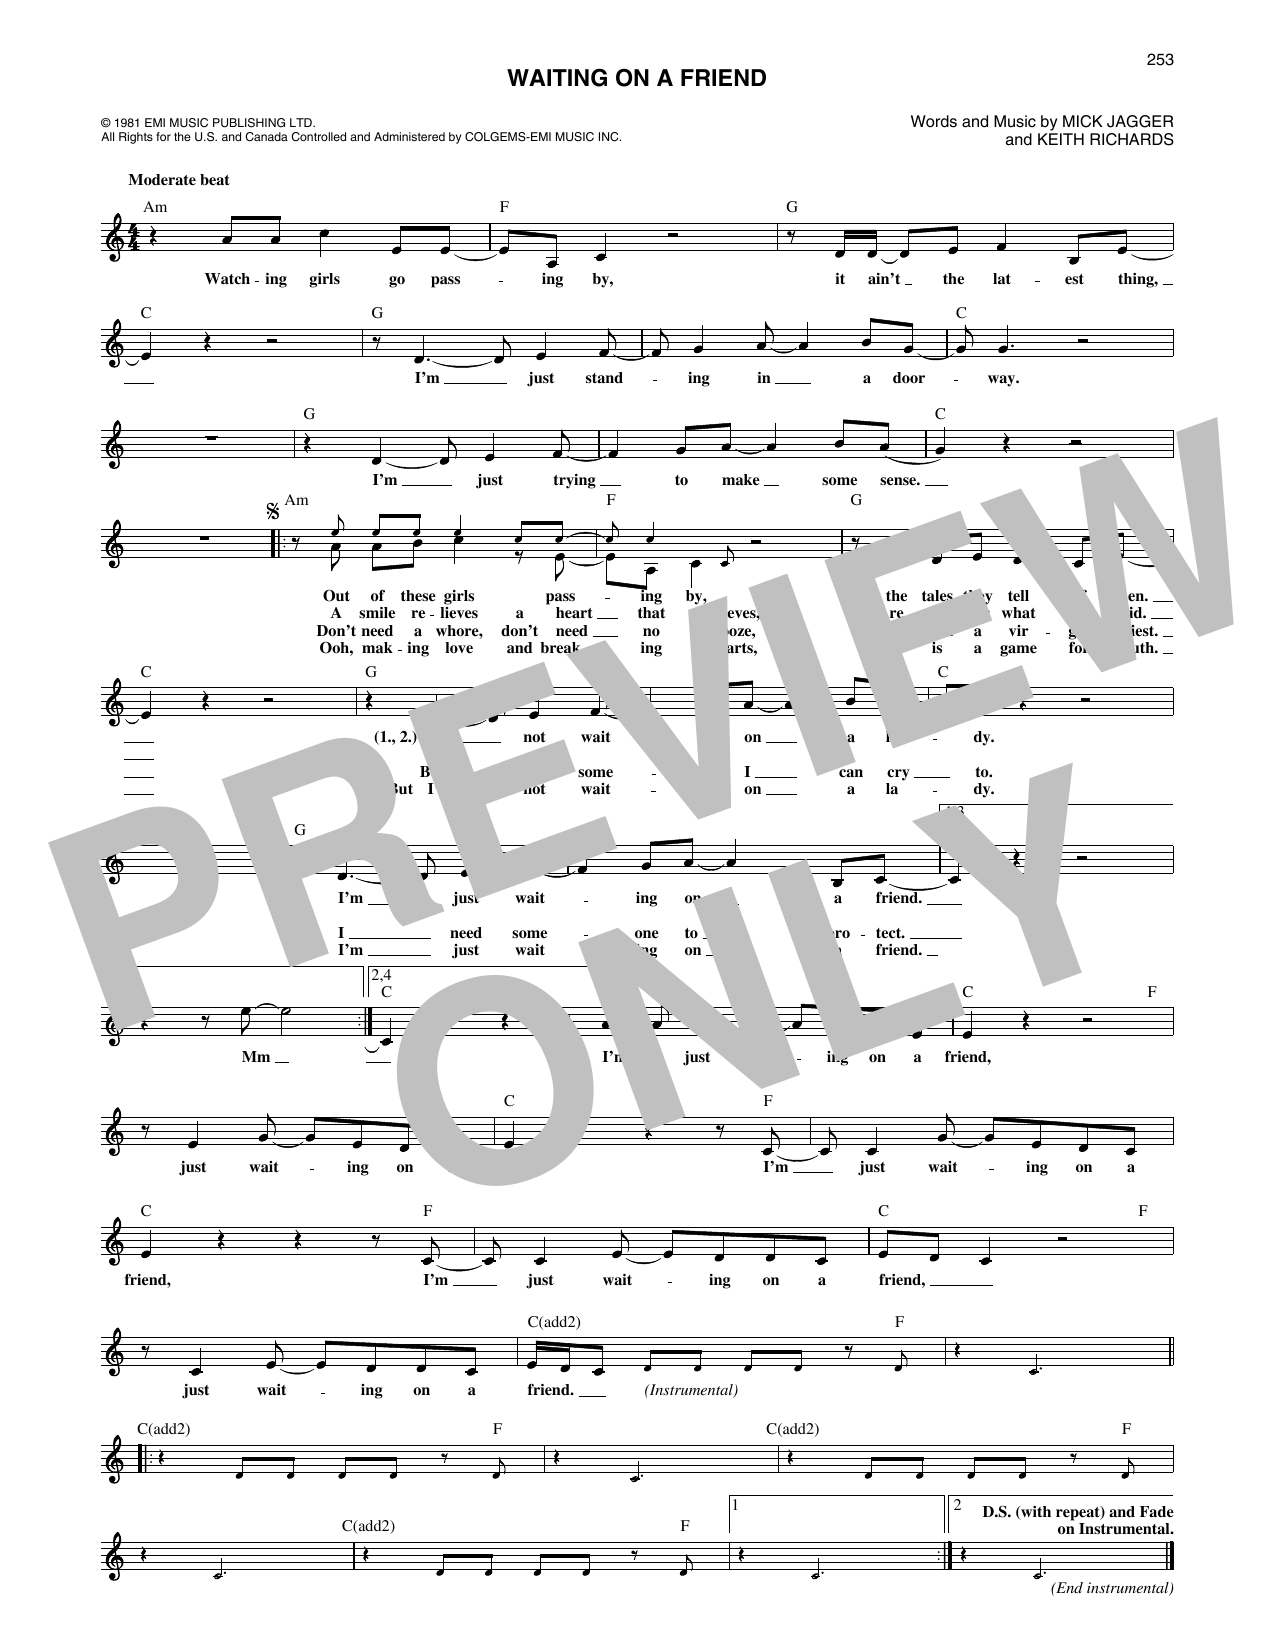 Download The Rolling Stones Waiting On A Friend Sheet Music